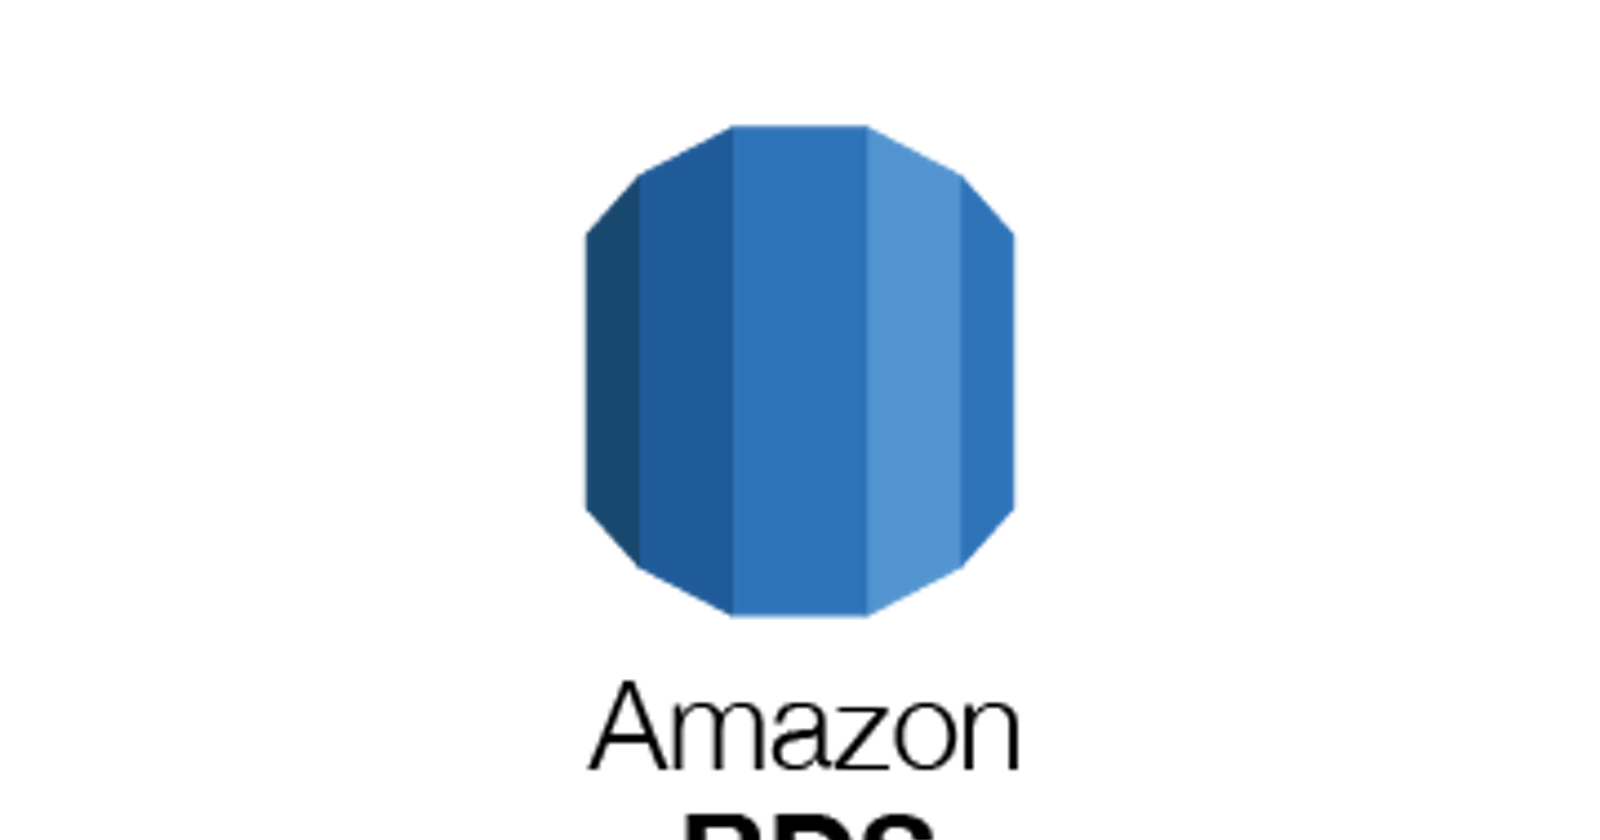 AWS RDS: Overview of Amazon Relational Database Service (RDS), how to create and manage RDS instances, and how to connect to databases.